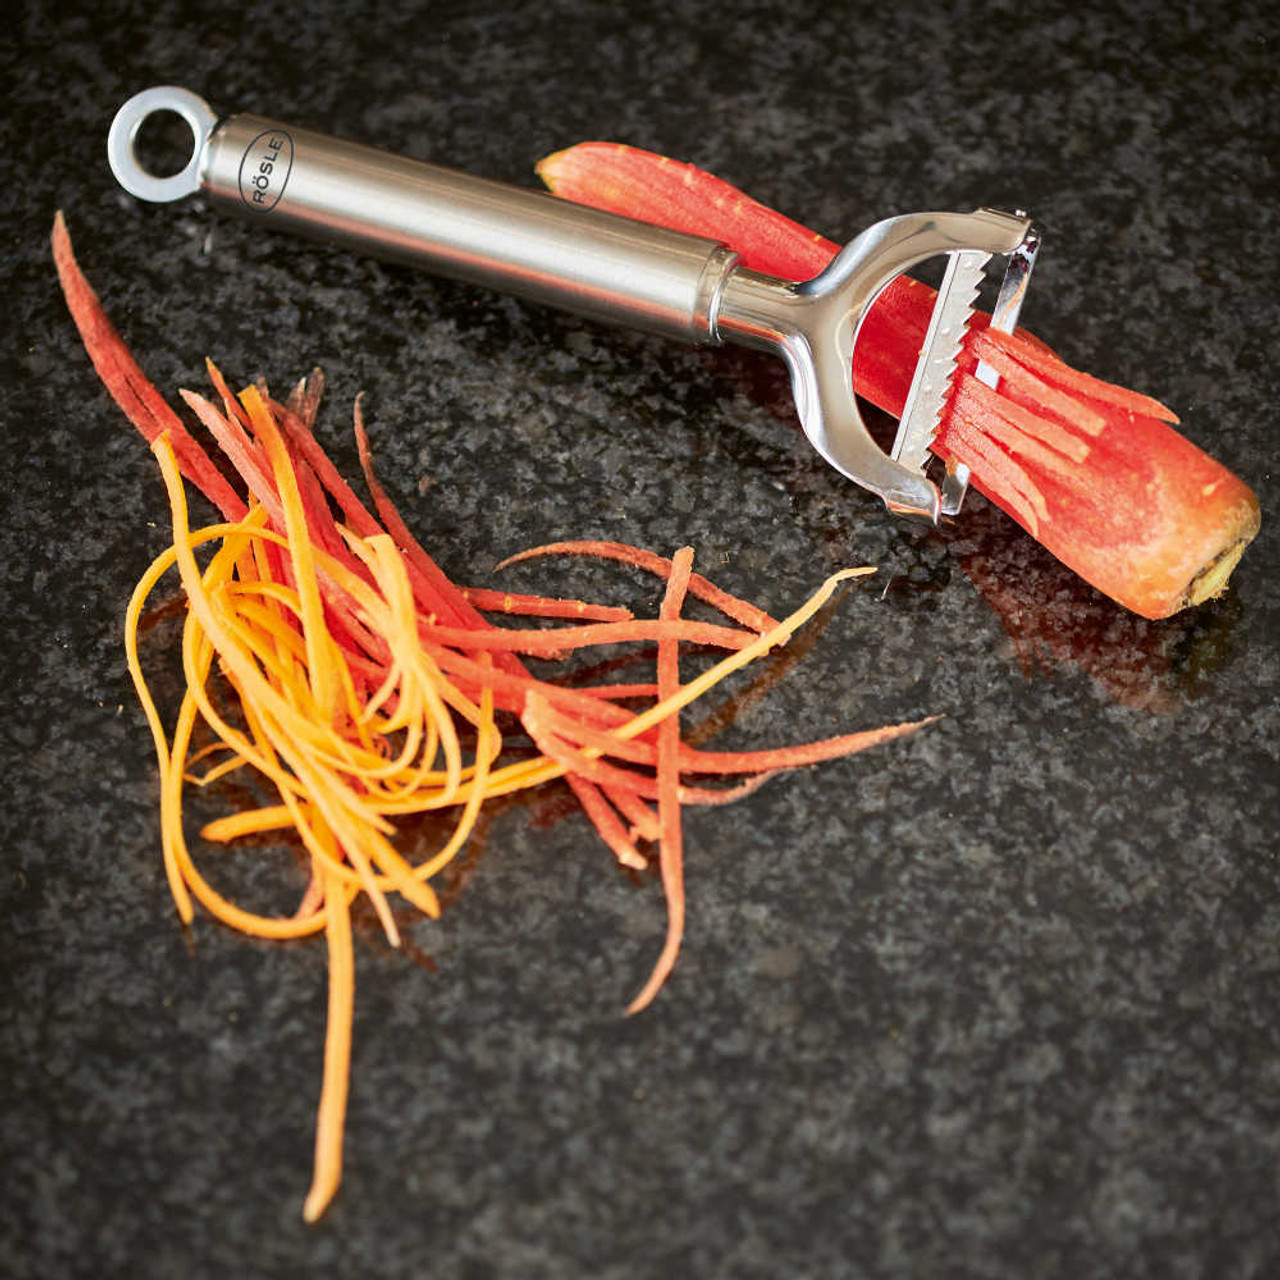 Buy Microplane Professional Swivel Peeler for Vegetables and